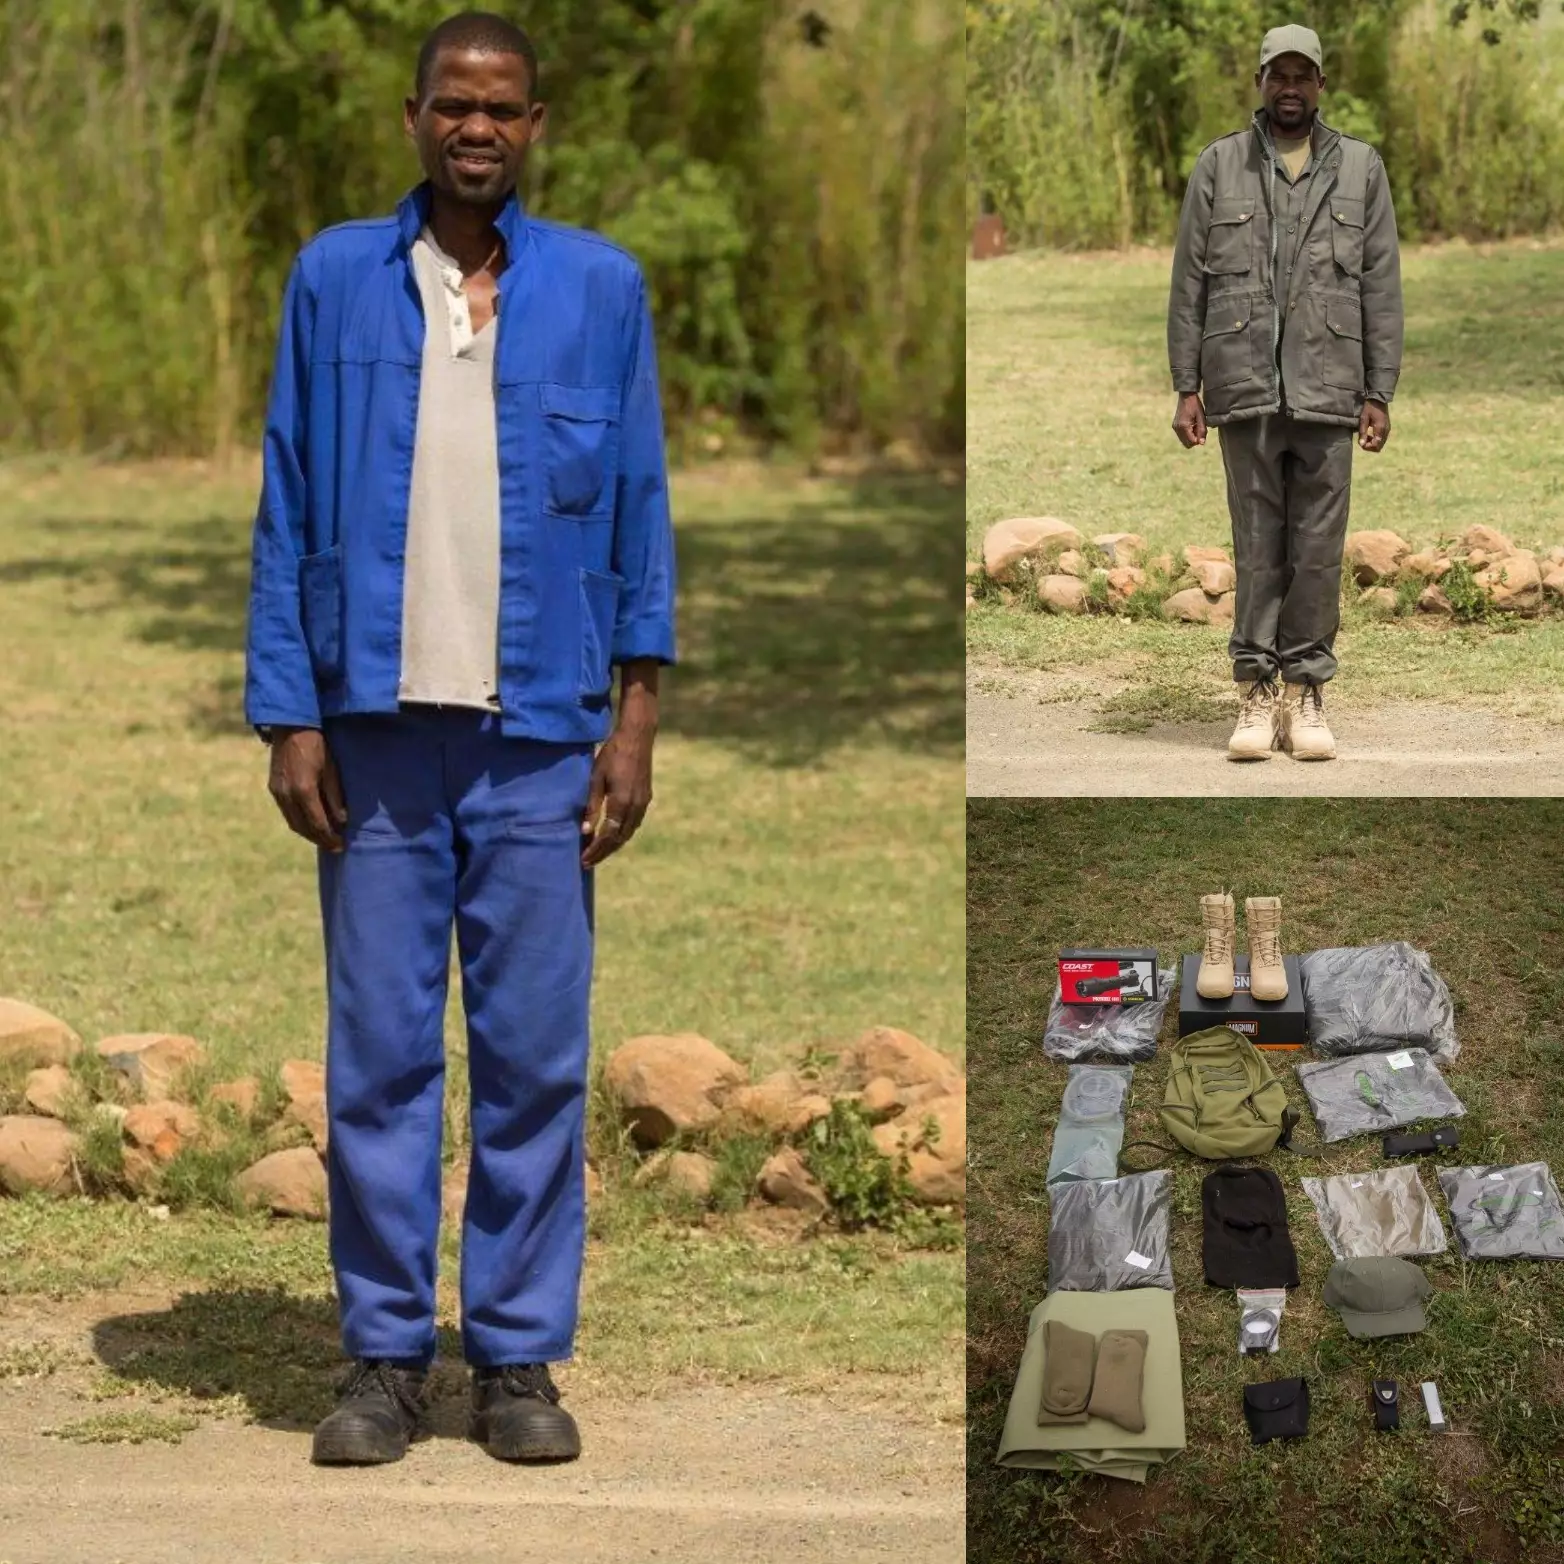 The basic equipment and uniform required for one ranger, which costs around $1000.